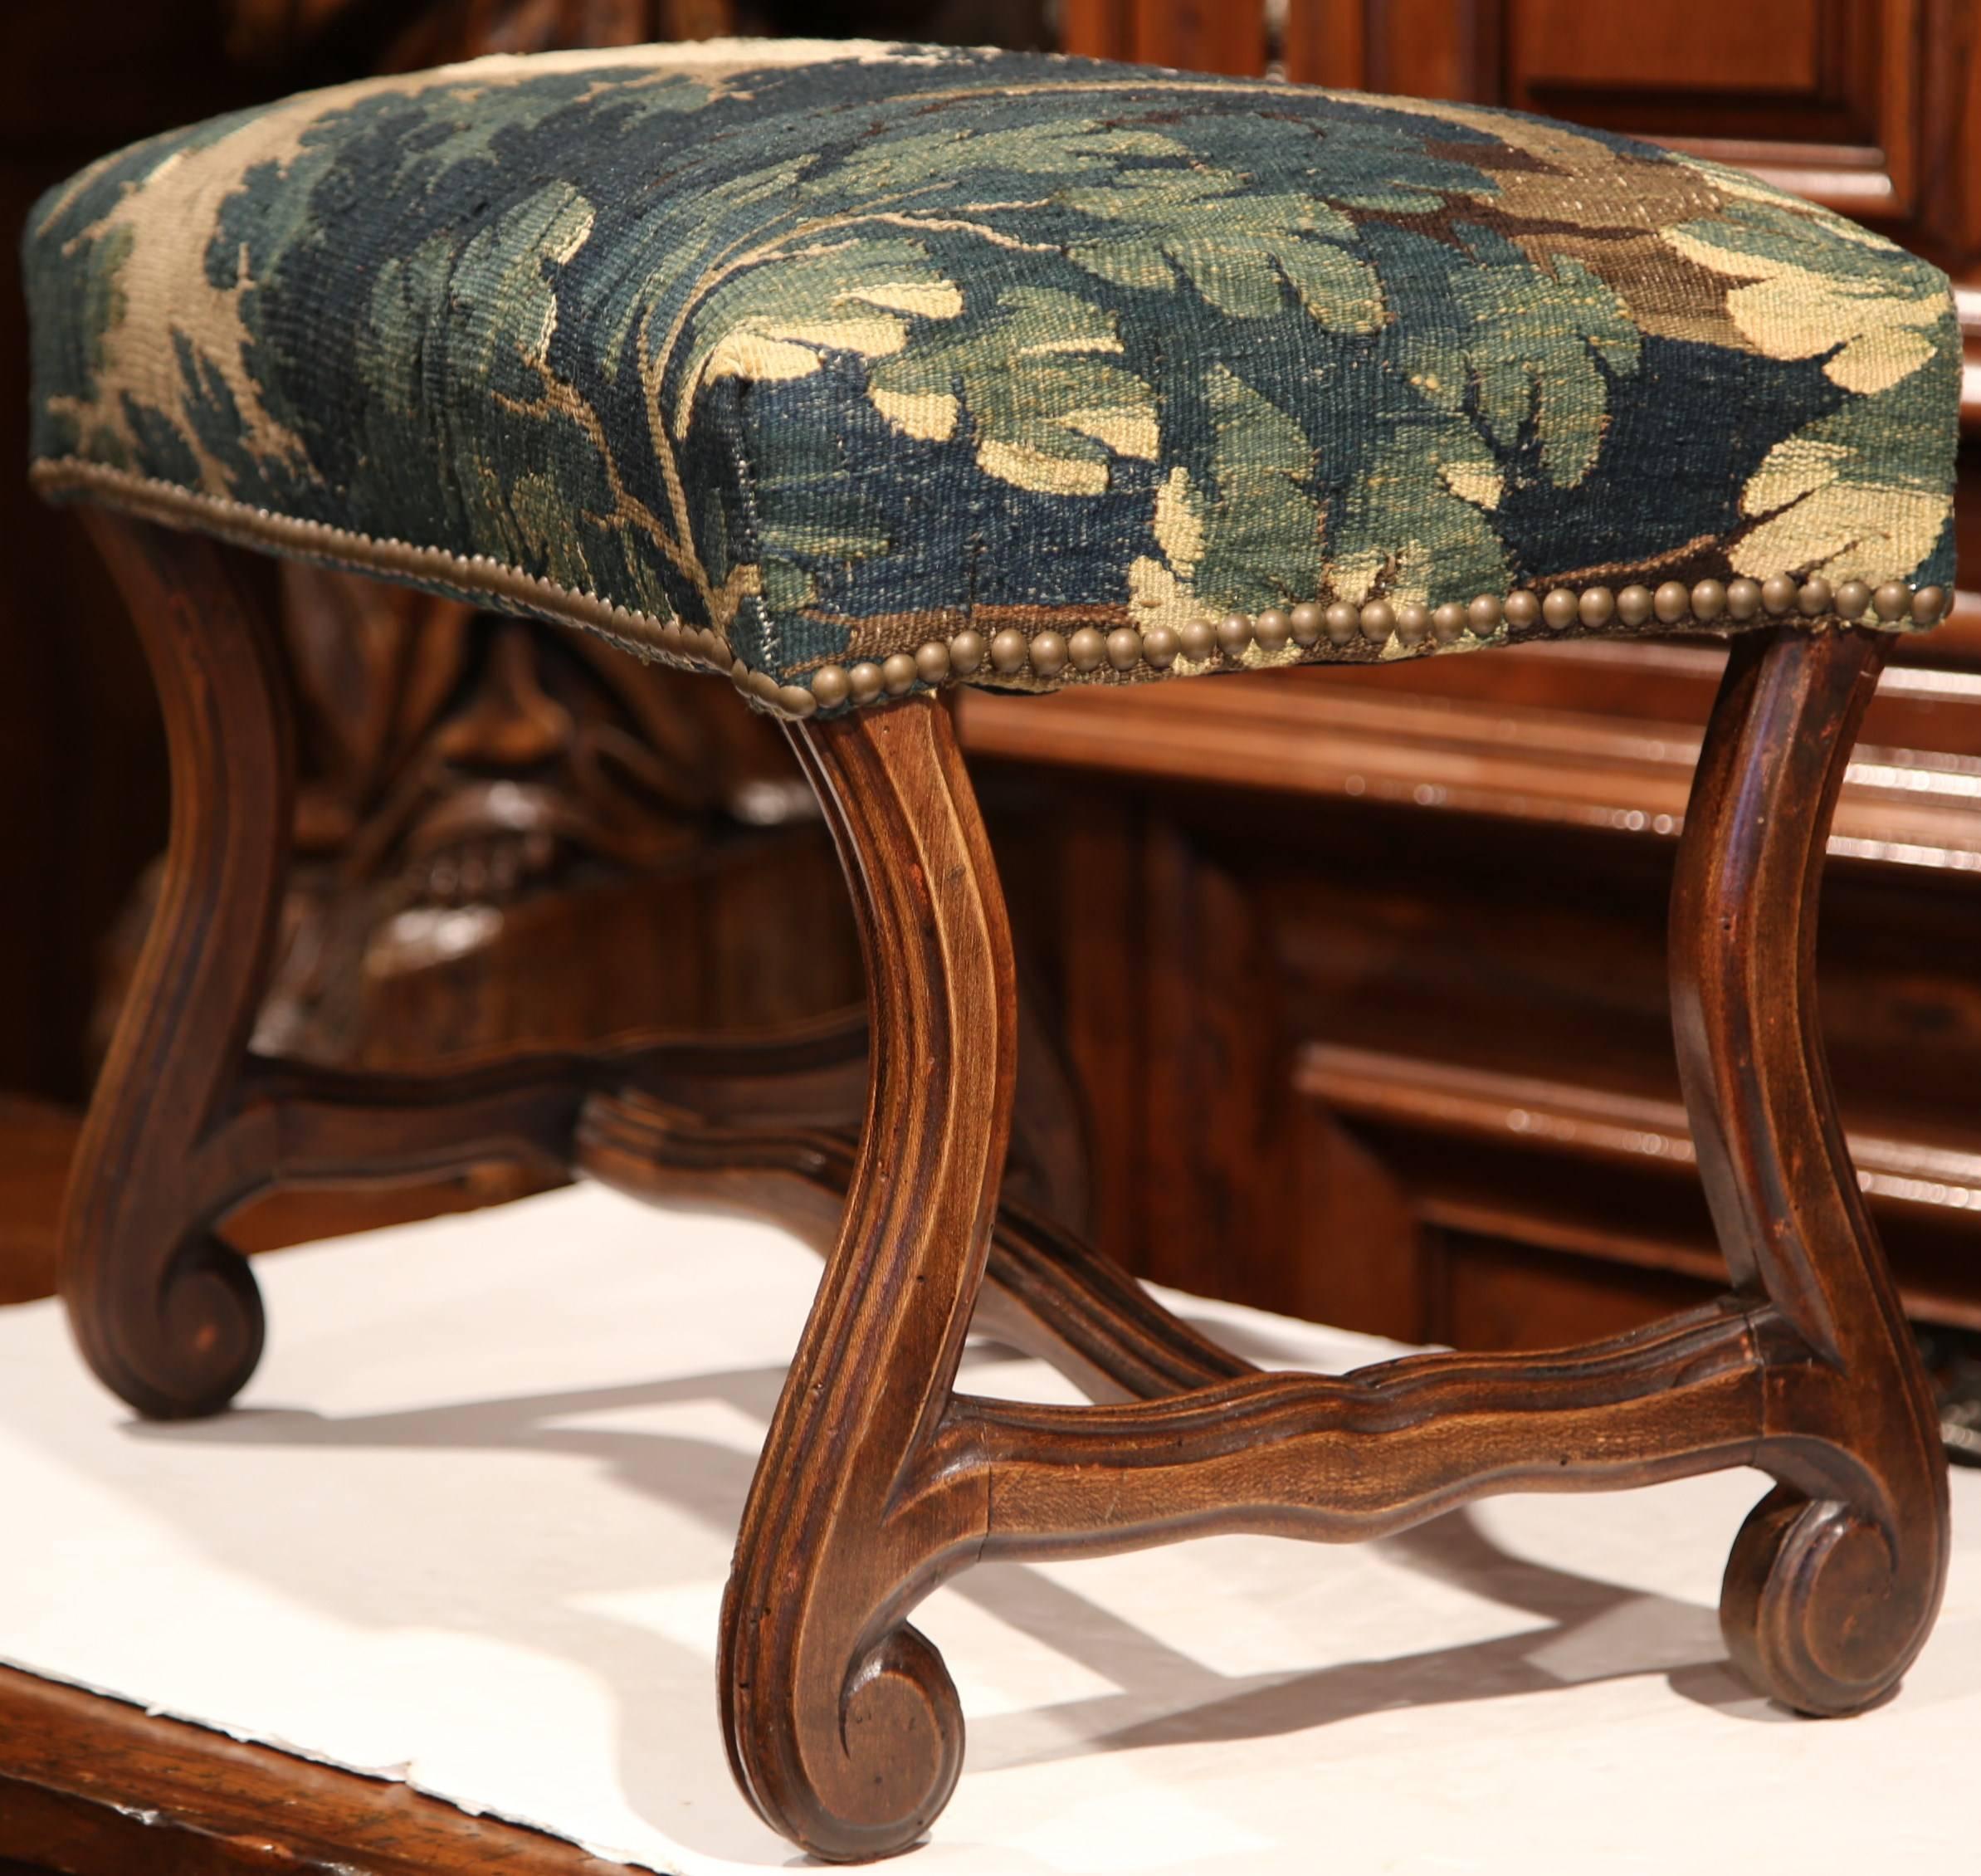 This simple, antique stool is an easy addition to a living room or study. The elegant fruitwood stool was crafted in France, circa 1880; it features a nicely carved base with rounded feet and has been upholstered with an old verdure Aubusson